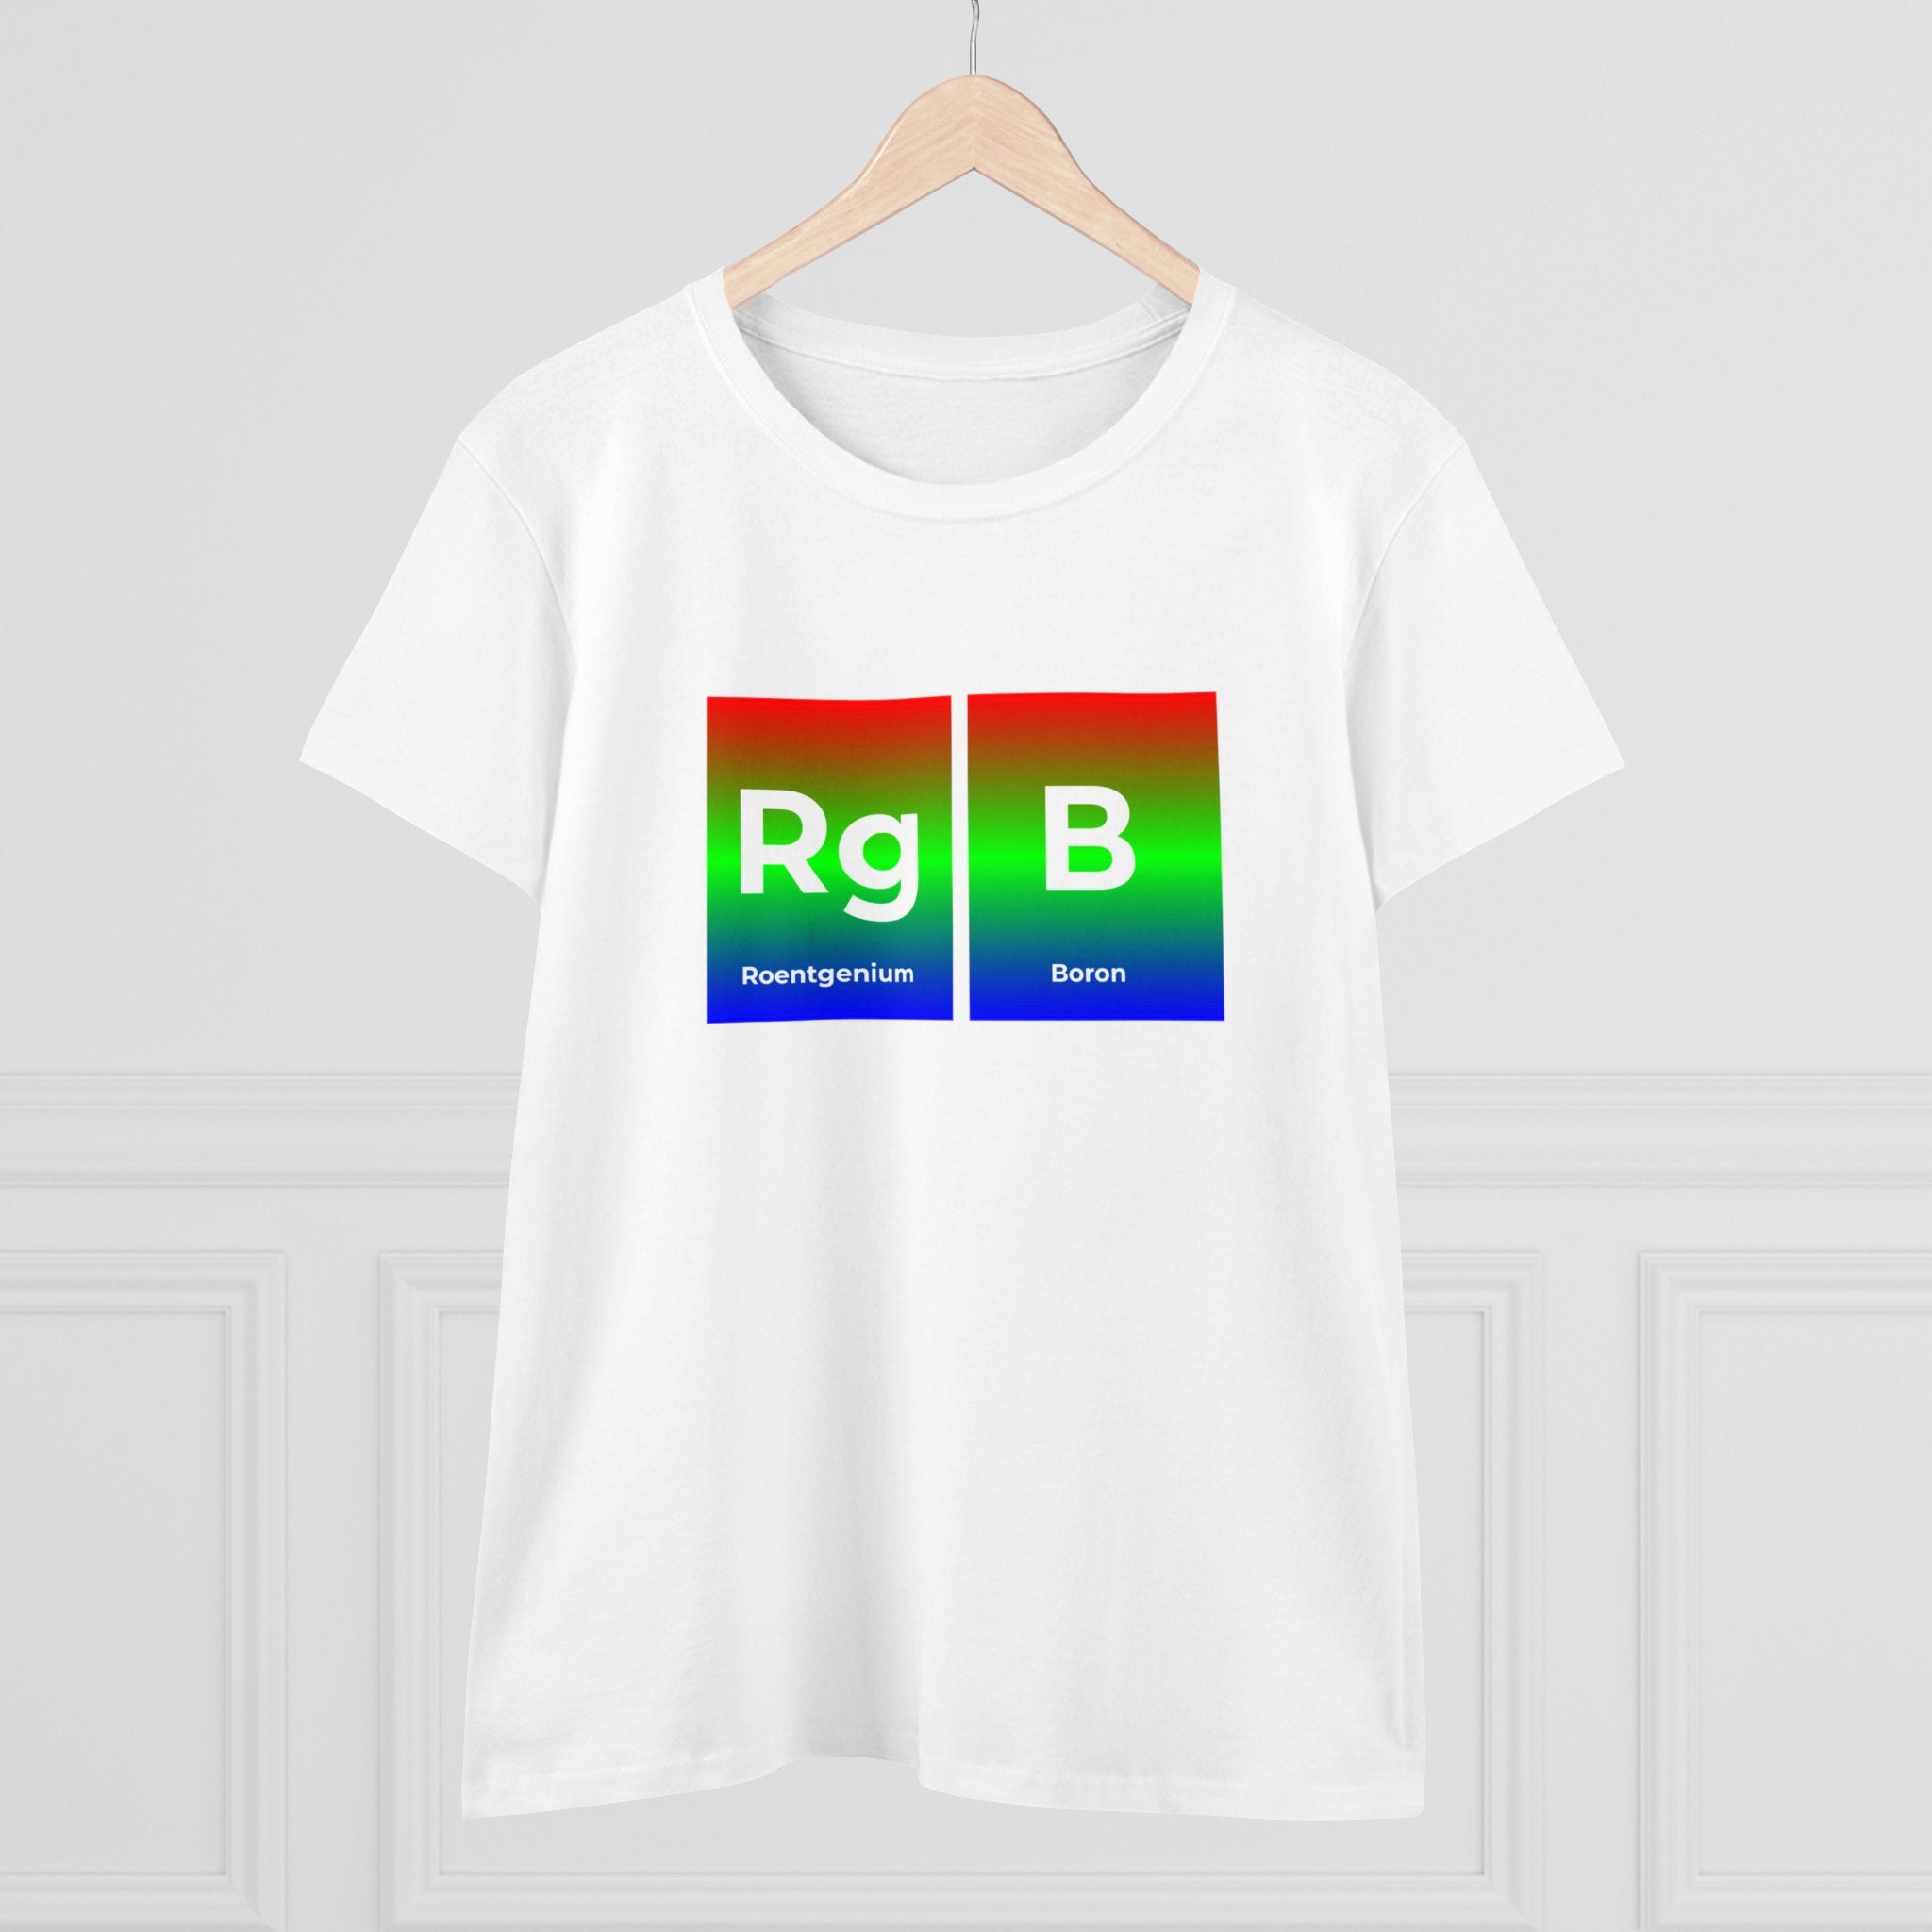 RG-B - Women's Tee hanging on a wooden hanger featuring two periodic table elements: Roentgenium ('Rg') and Boron ('B') with a gradient background. Made from soft, breathable cotton, it highlights our commitment to ethical fashion.